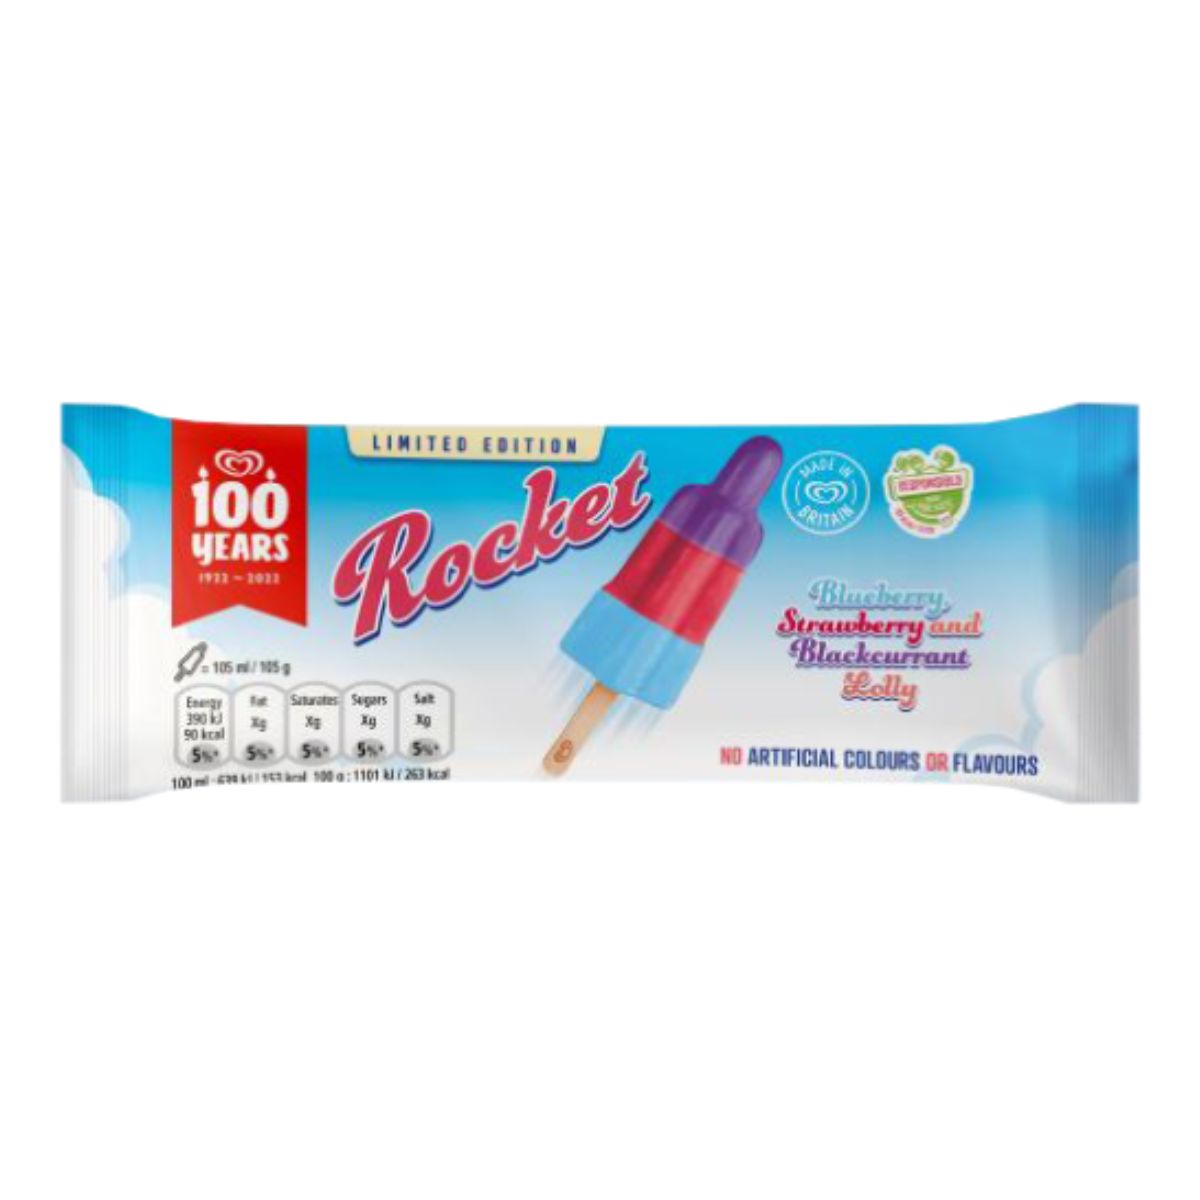 A pack of Walls - Rocket Lolly - 55ml ice pops on a white background.